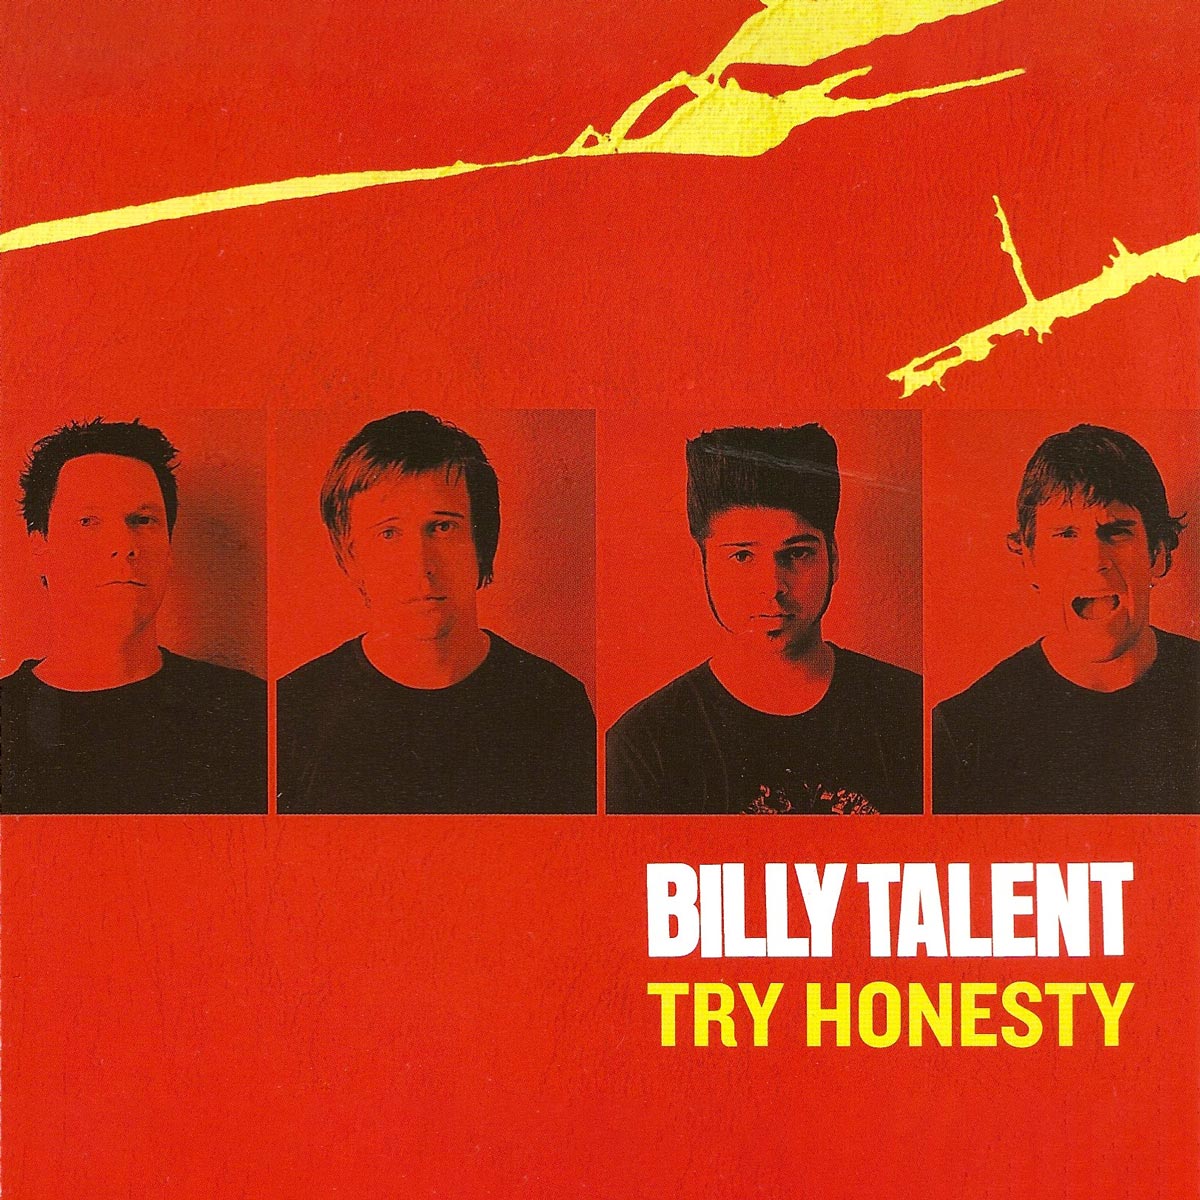 Discographie - Billy Talent - Try Honesty - Single